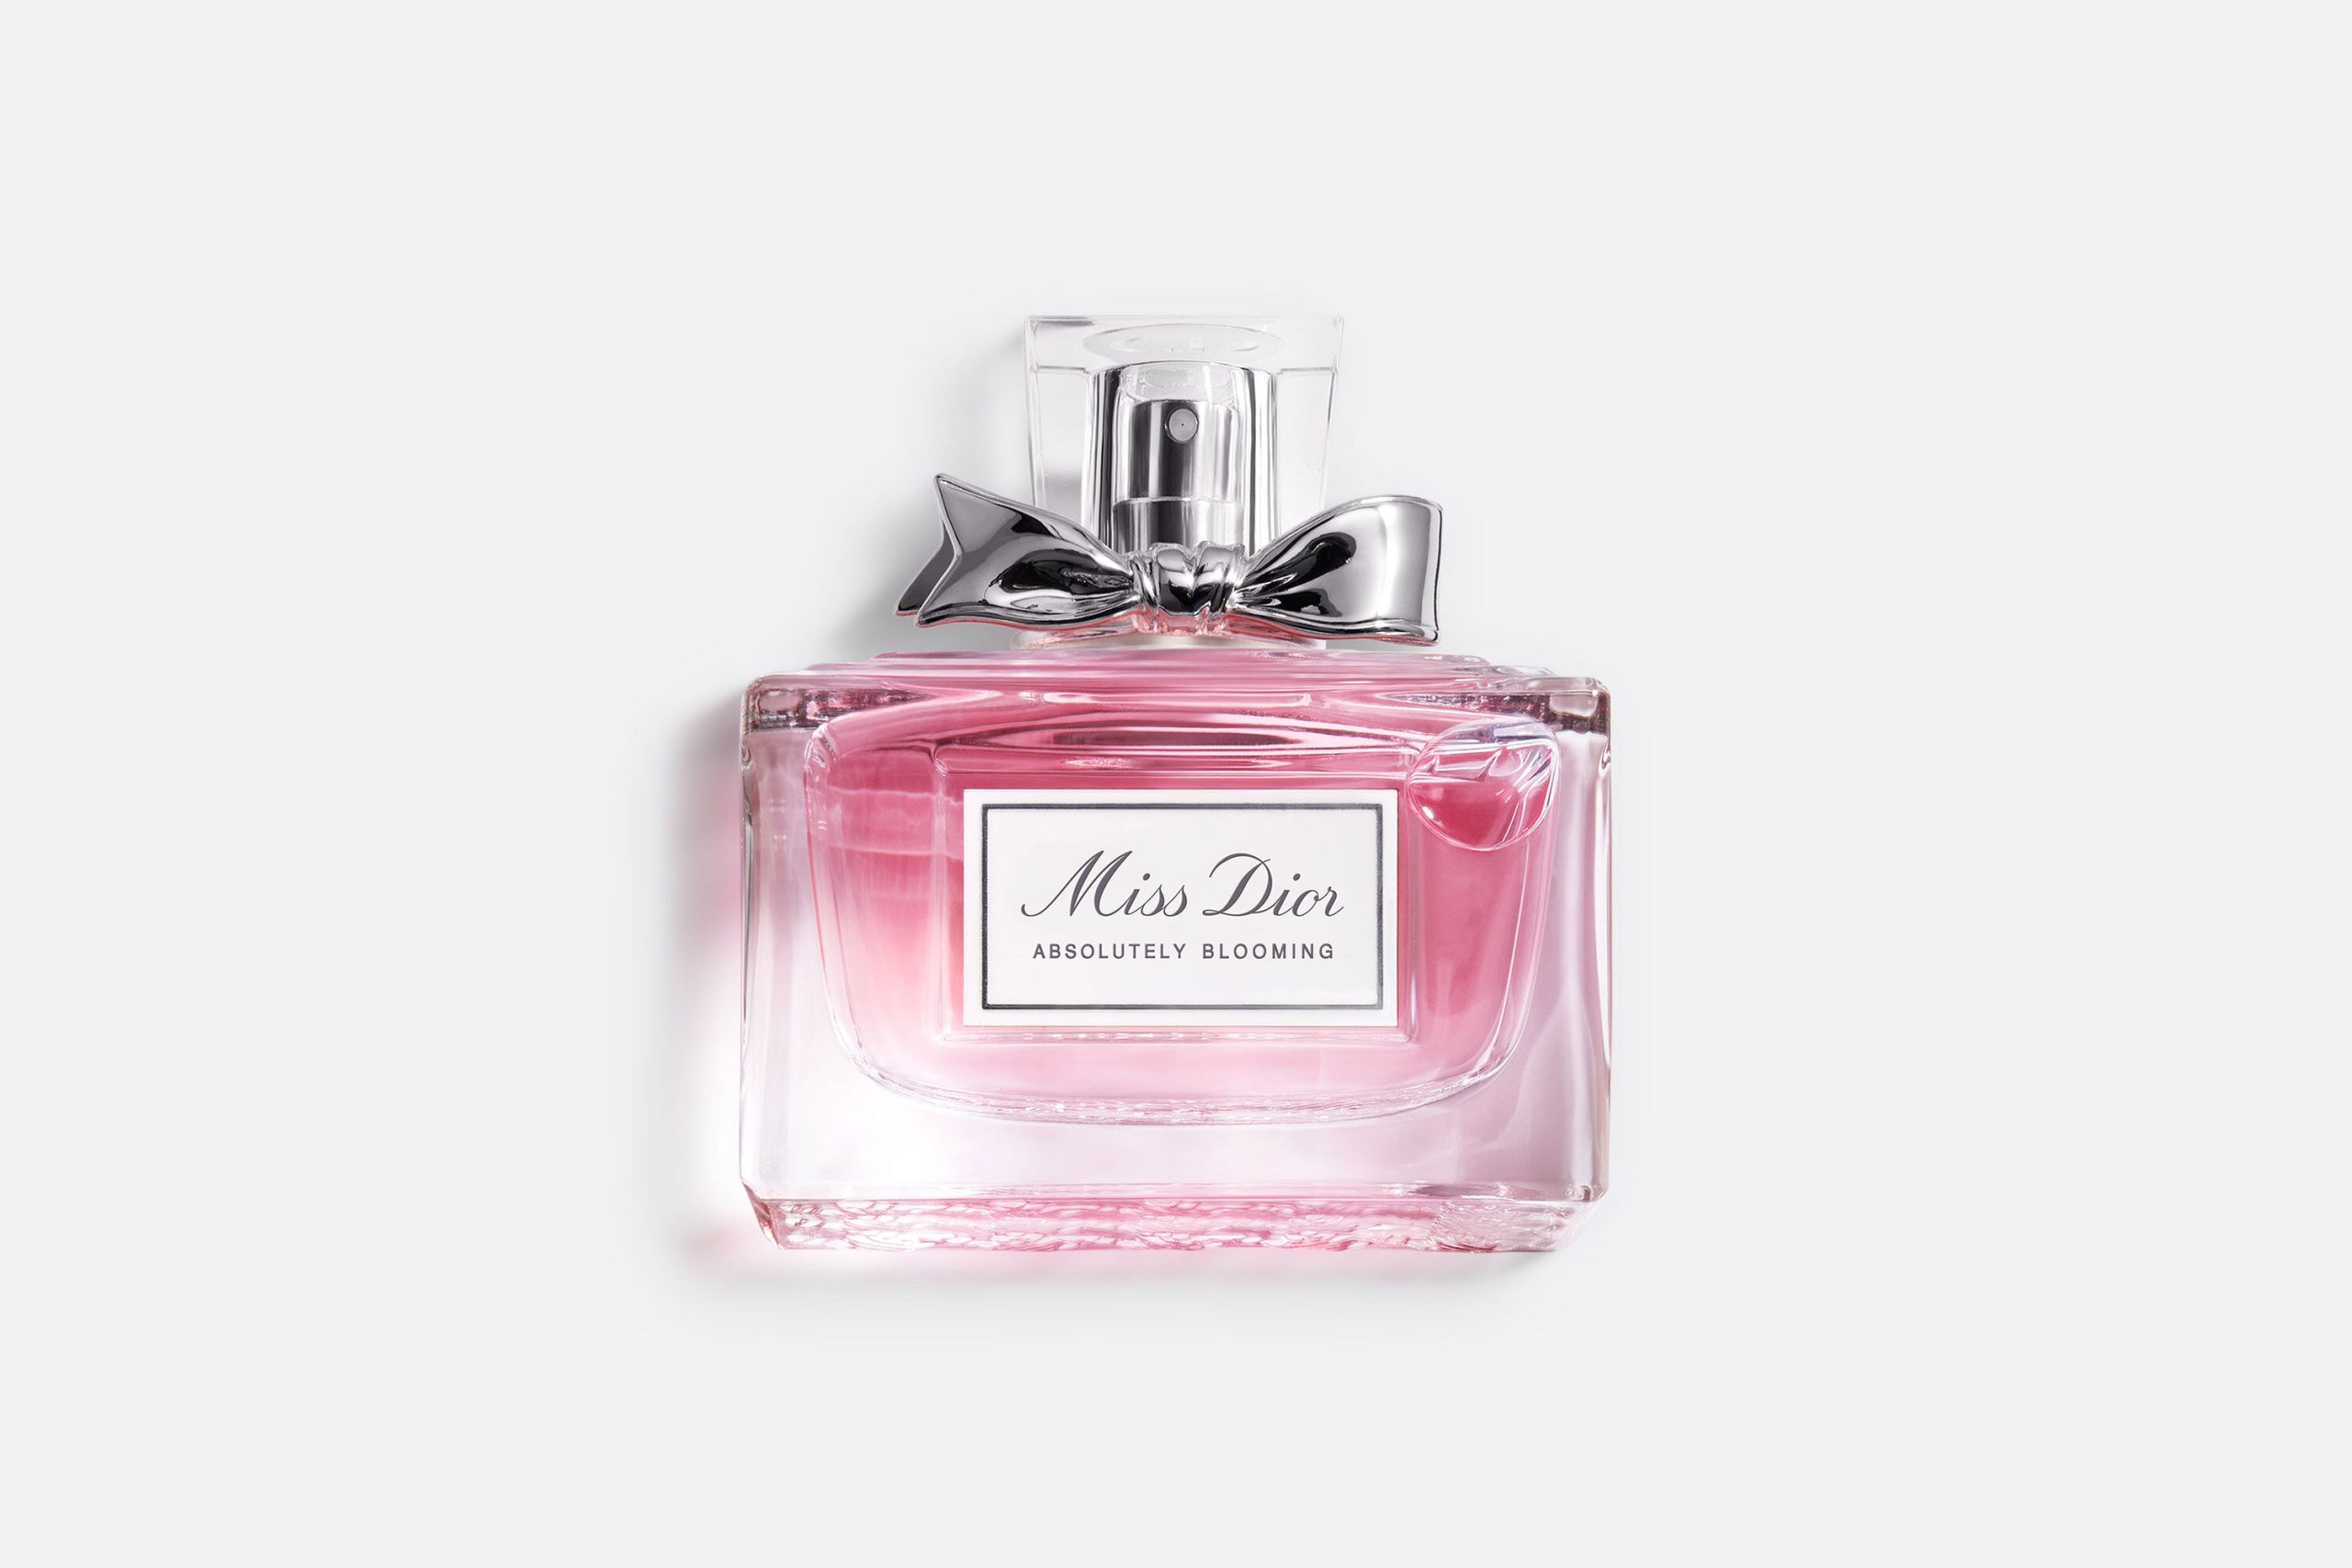 Christian Dior Miss Dior Absolutely Blooming For Women Eau De Parfum EDP 100ml at Ratans Online Shop - Perfumes Wholesale and Retailer Fragrance